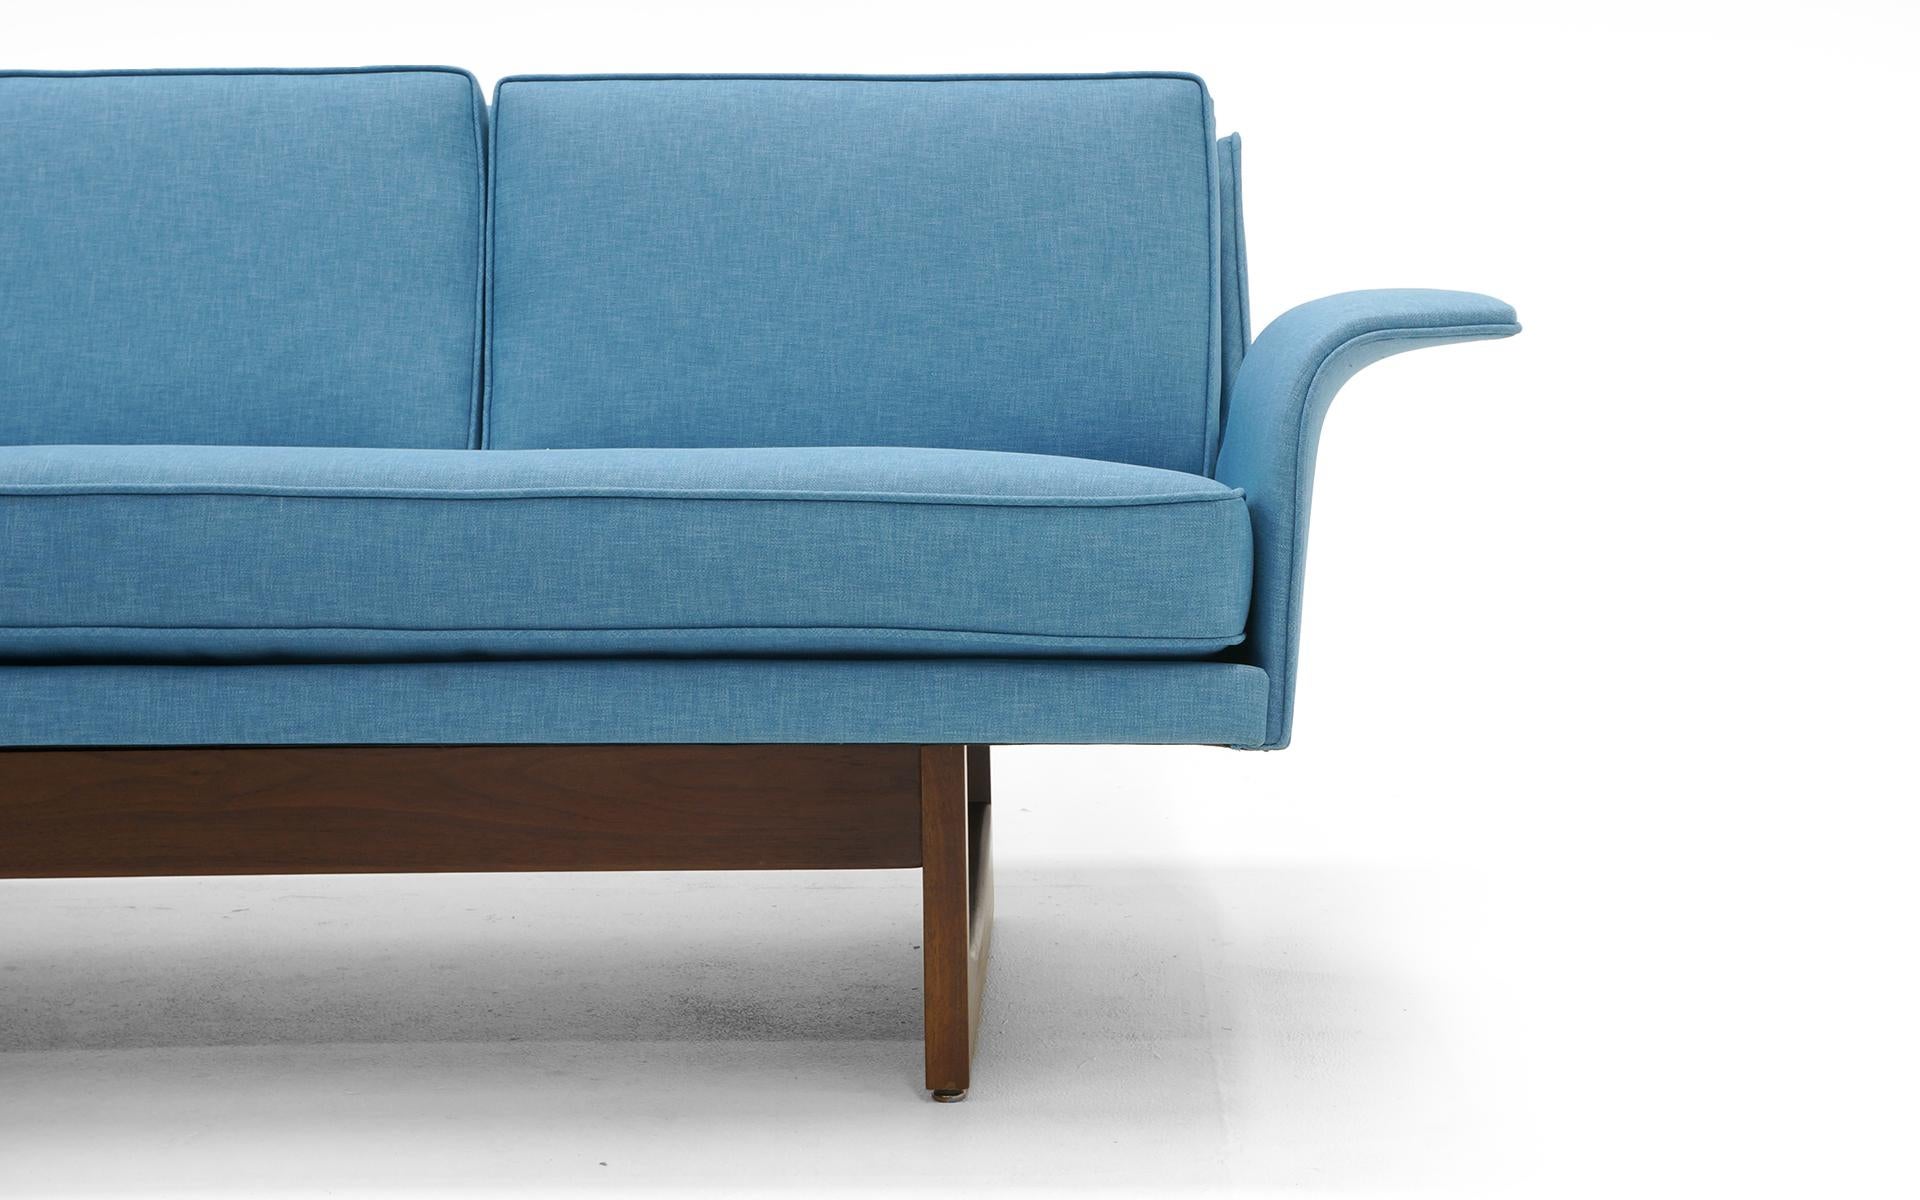 Upholstery Four-Seat Sofa Possibly Danish Modern or Adrian Pearsall, Beautiful Blue Fabric